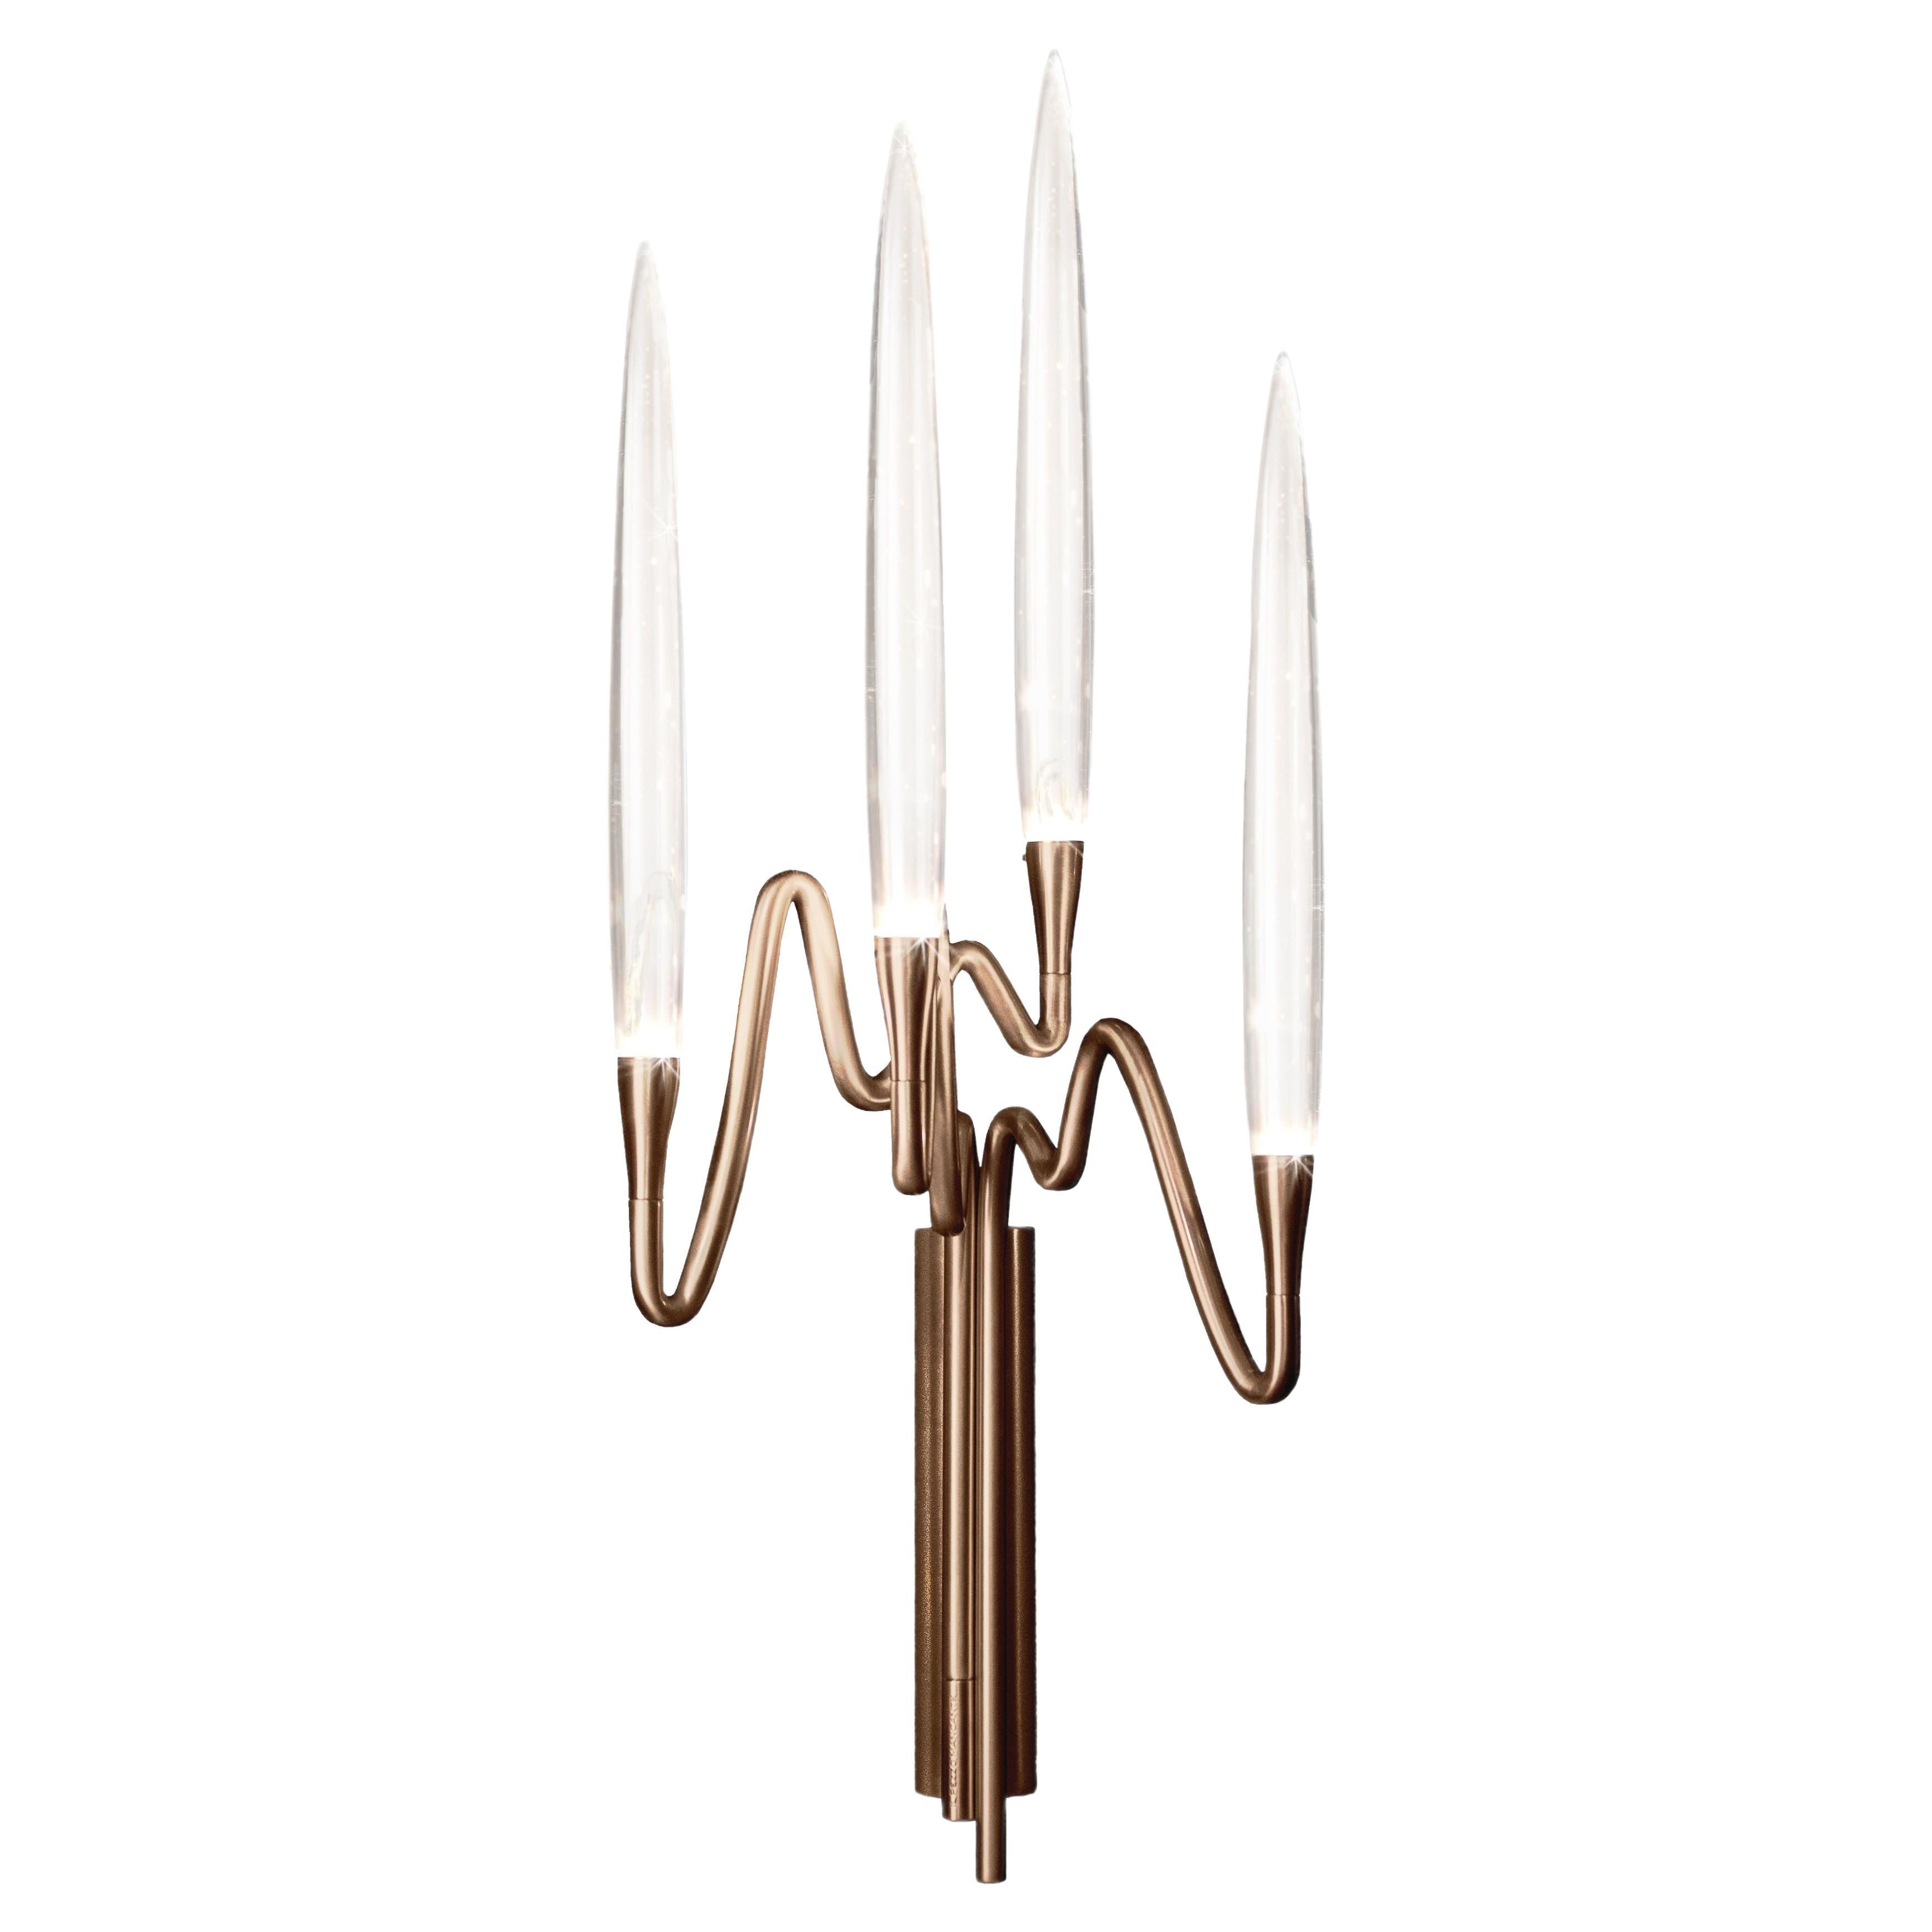 "Il Pezzo 3 Wall Sconce" - width 27cm/10.3" - bronze - crystal - LEDs im Angebot